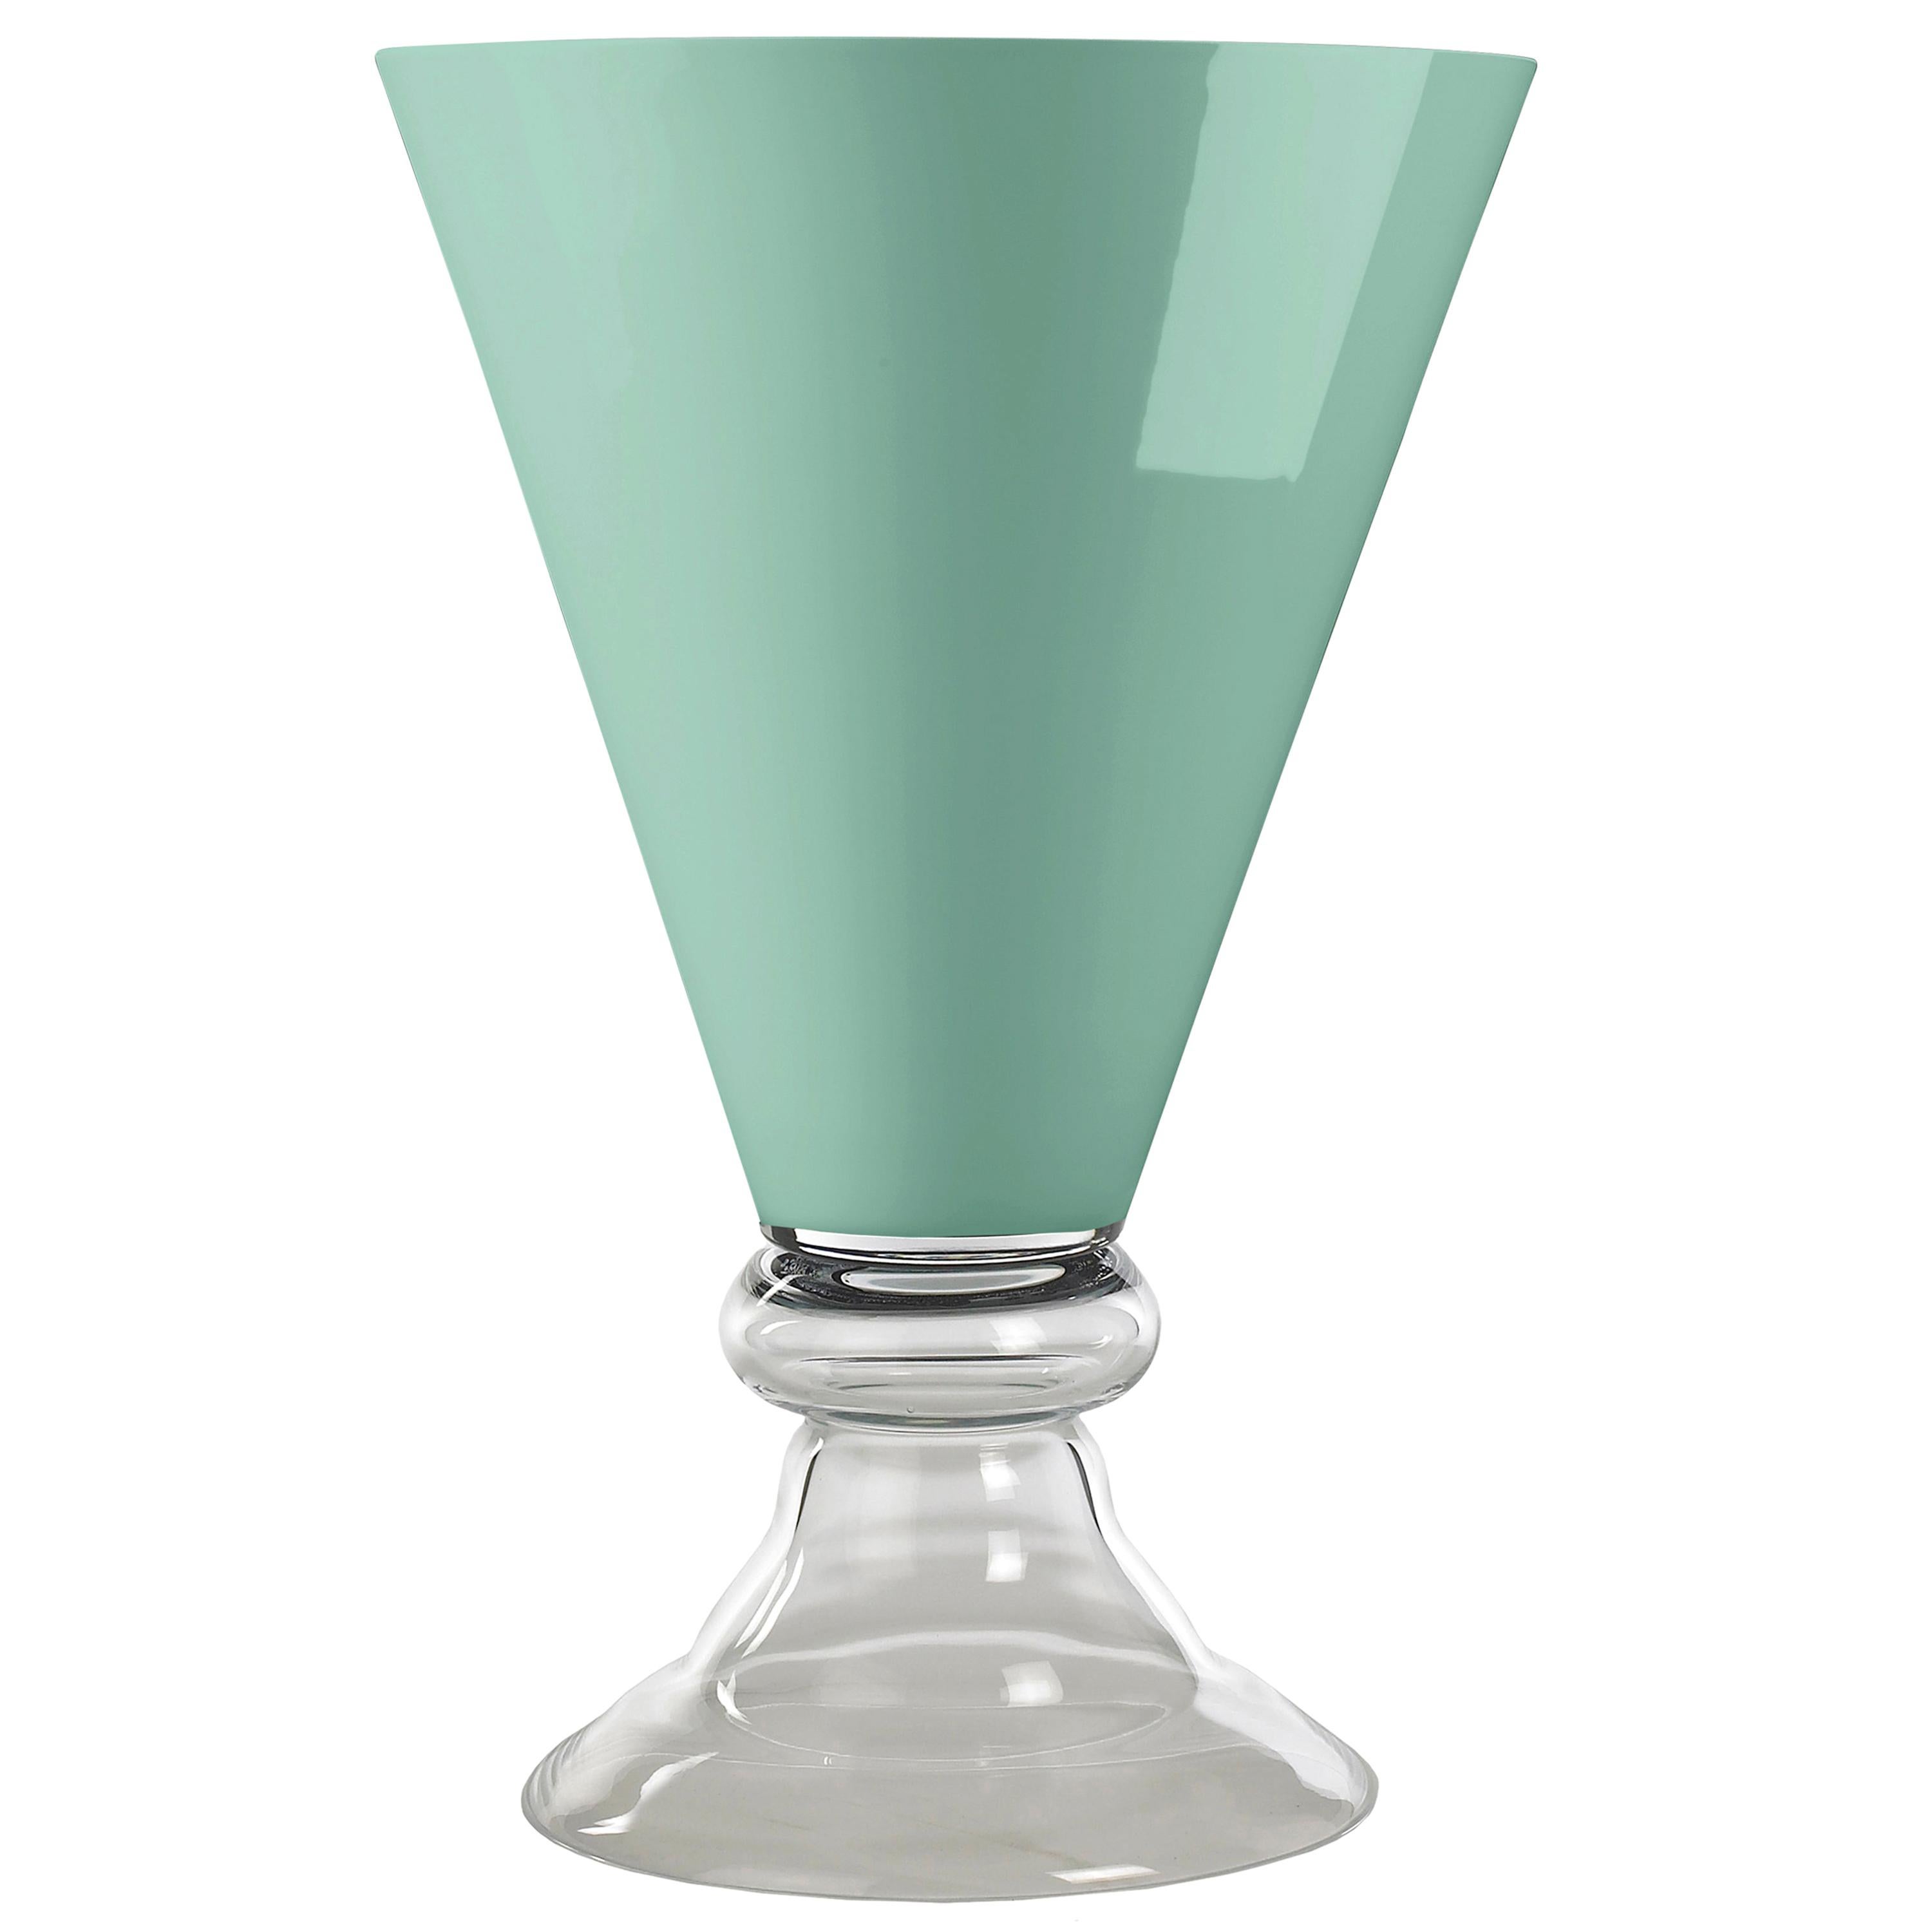 Bowl New Romantic, Neo Mint Color, 2020 Trend, in Glass, Italy For Sale